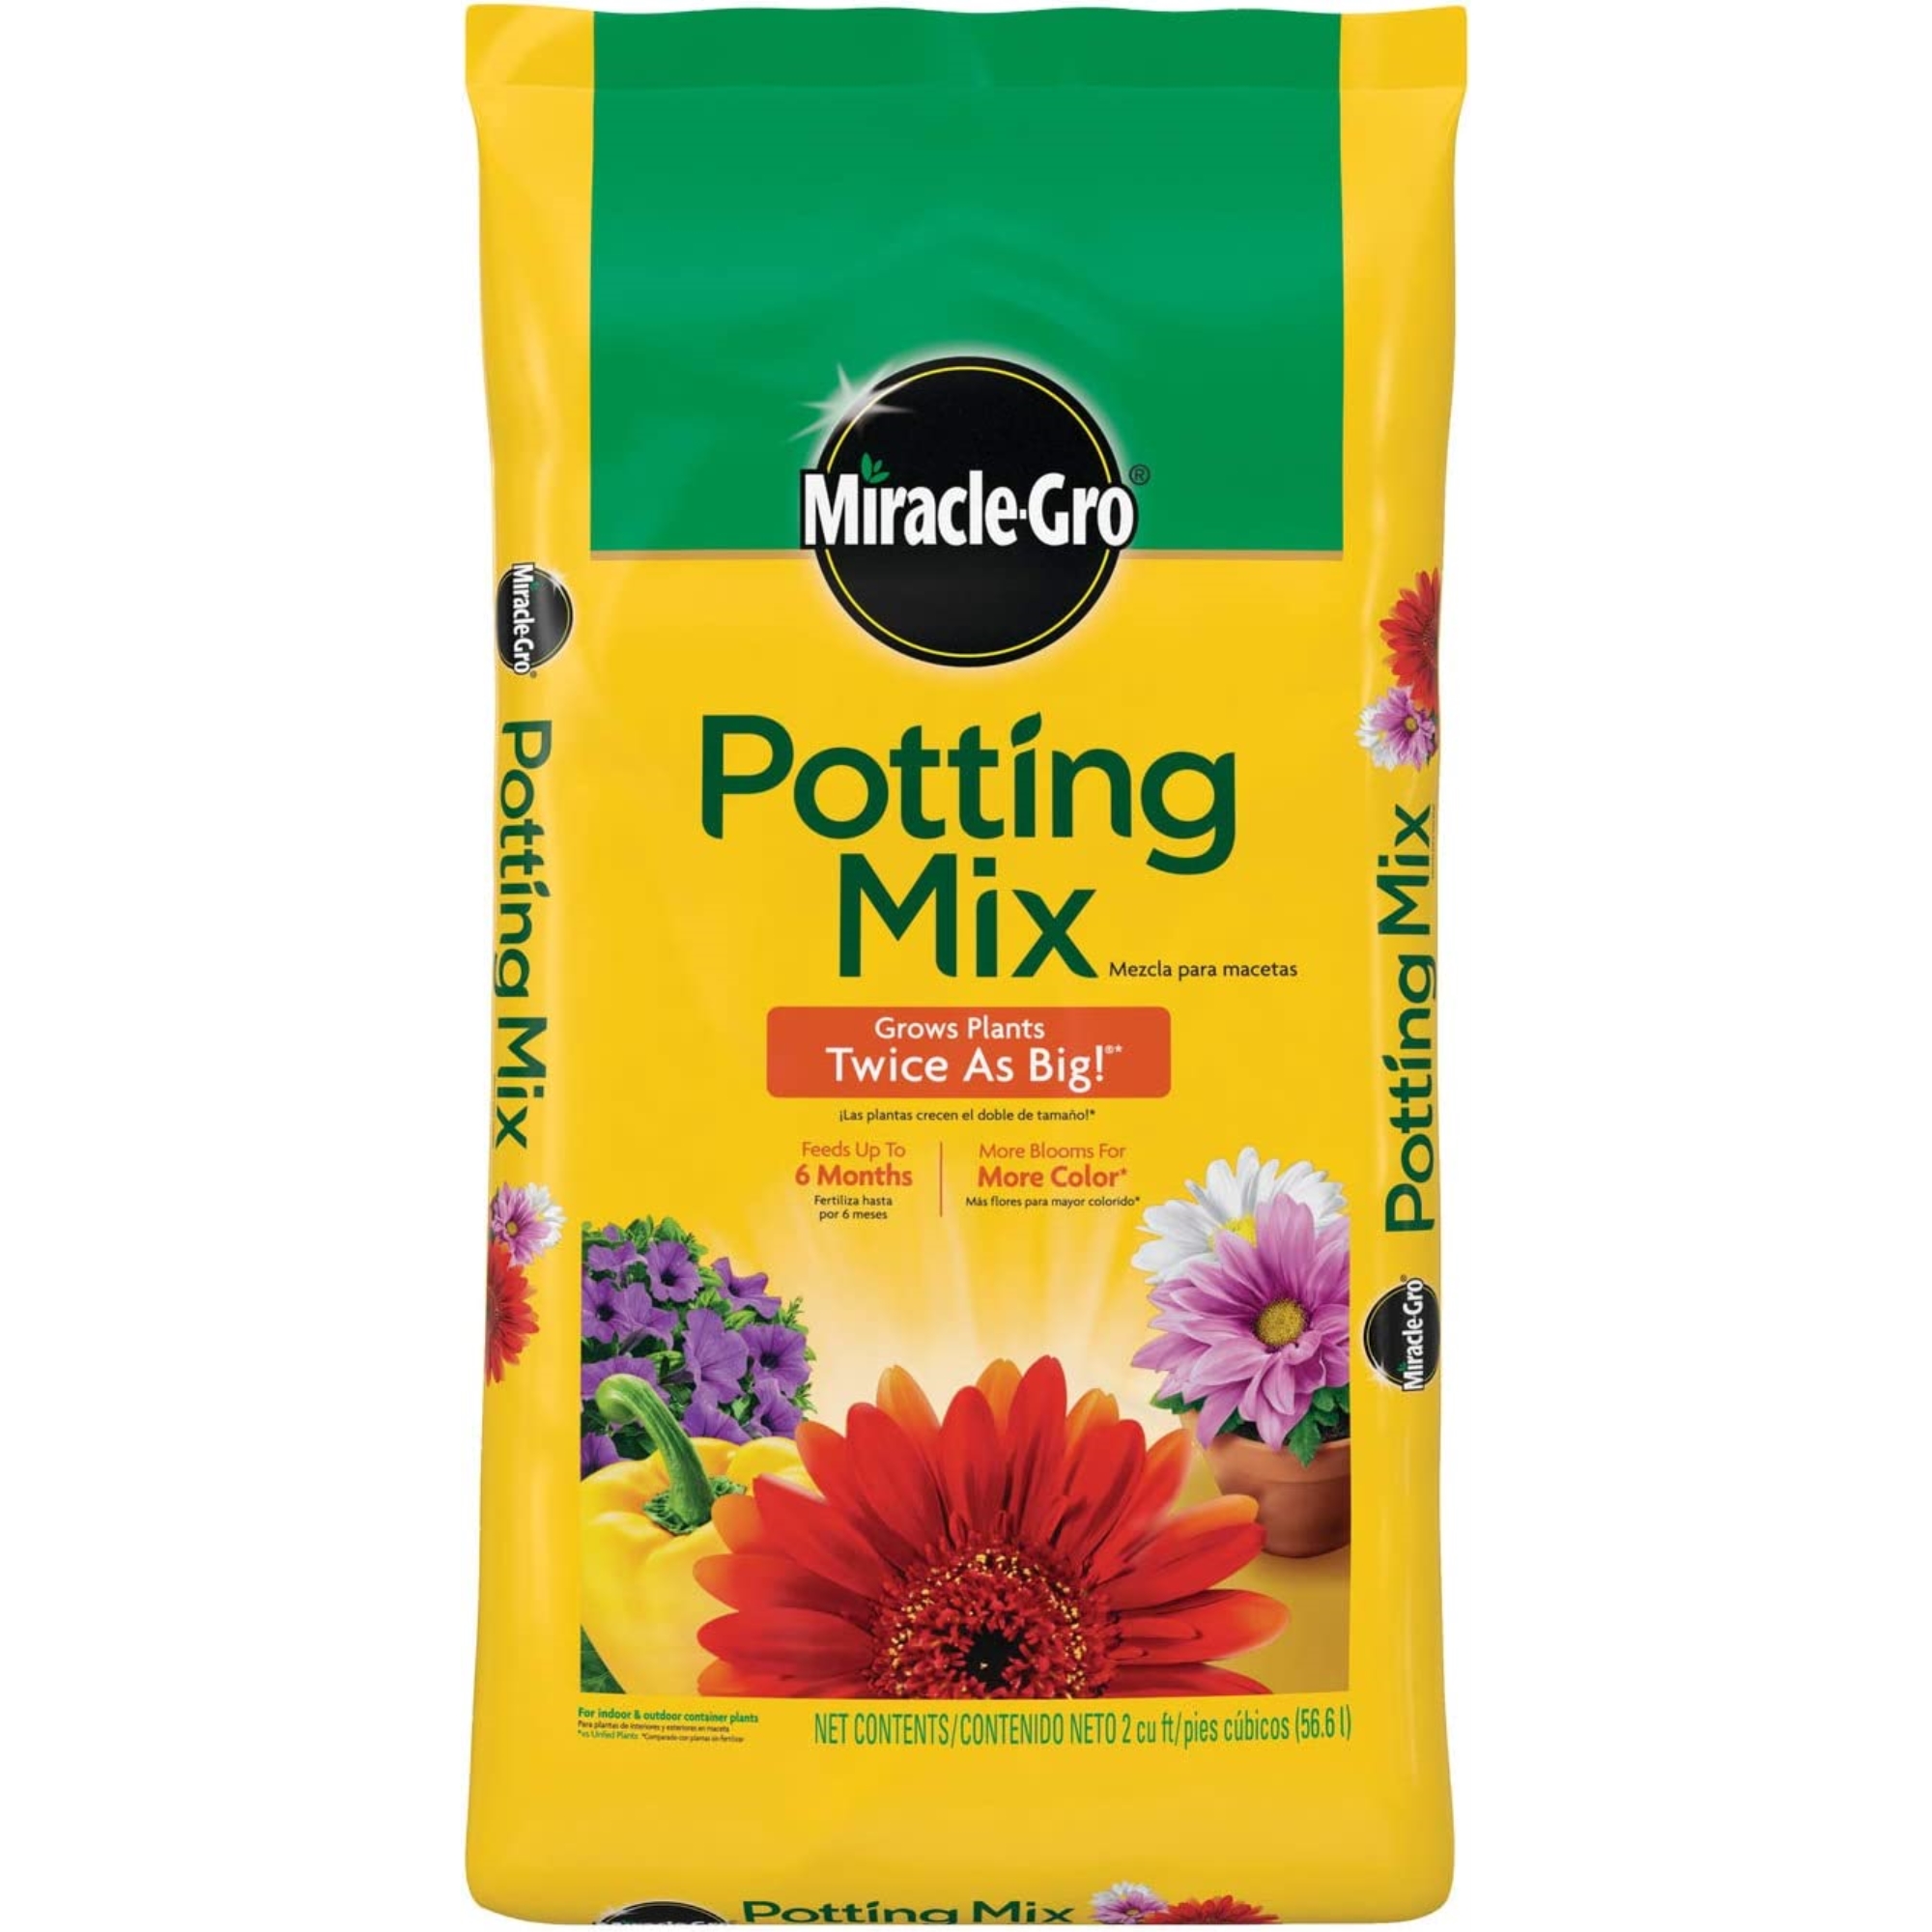 Miracle-Gro Potting Mix, 2 cu. ft., Feeds Plants up to 6 Months - image 1 of 8